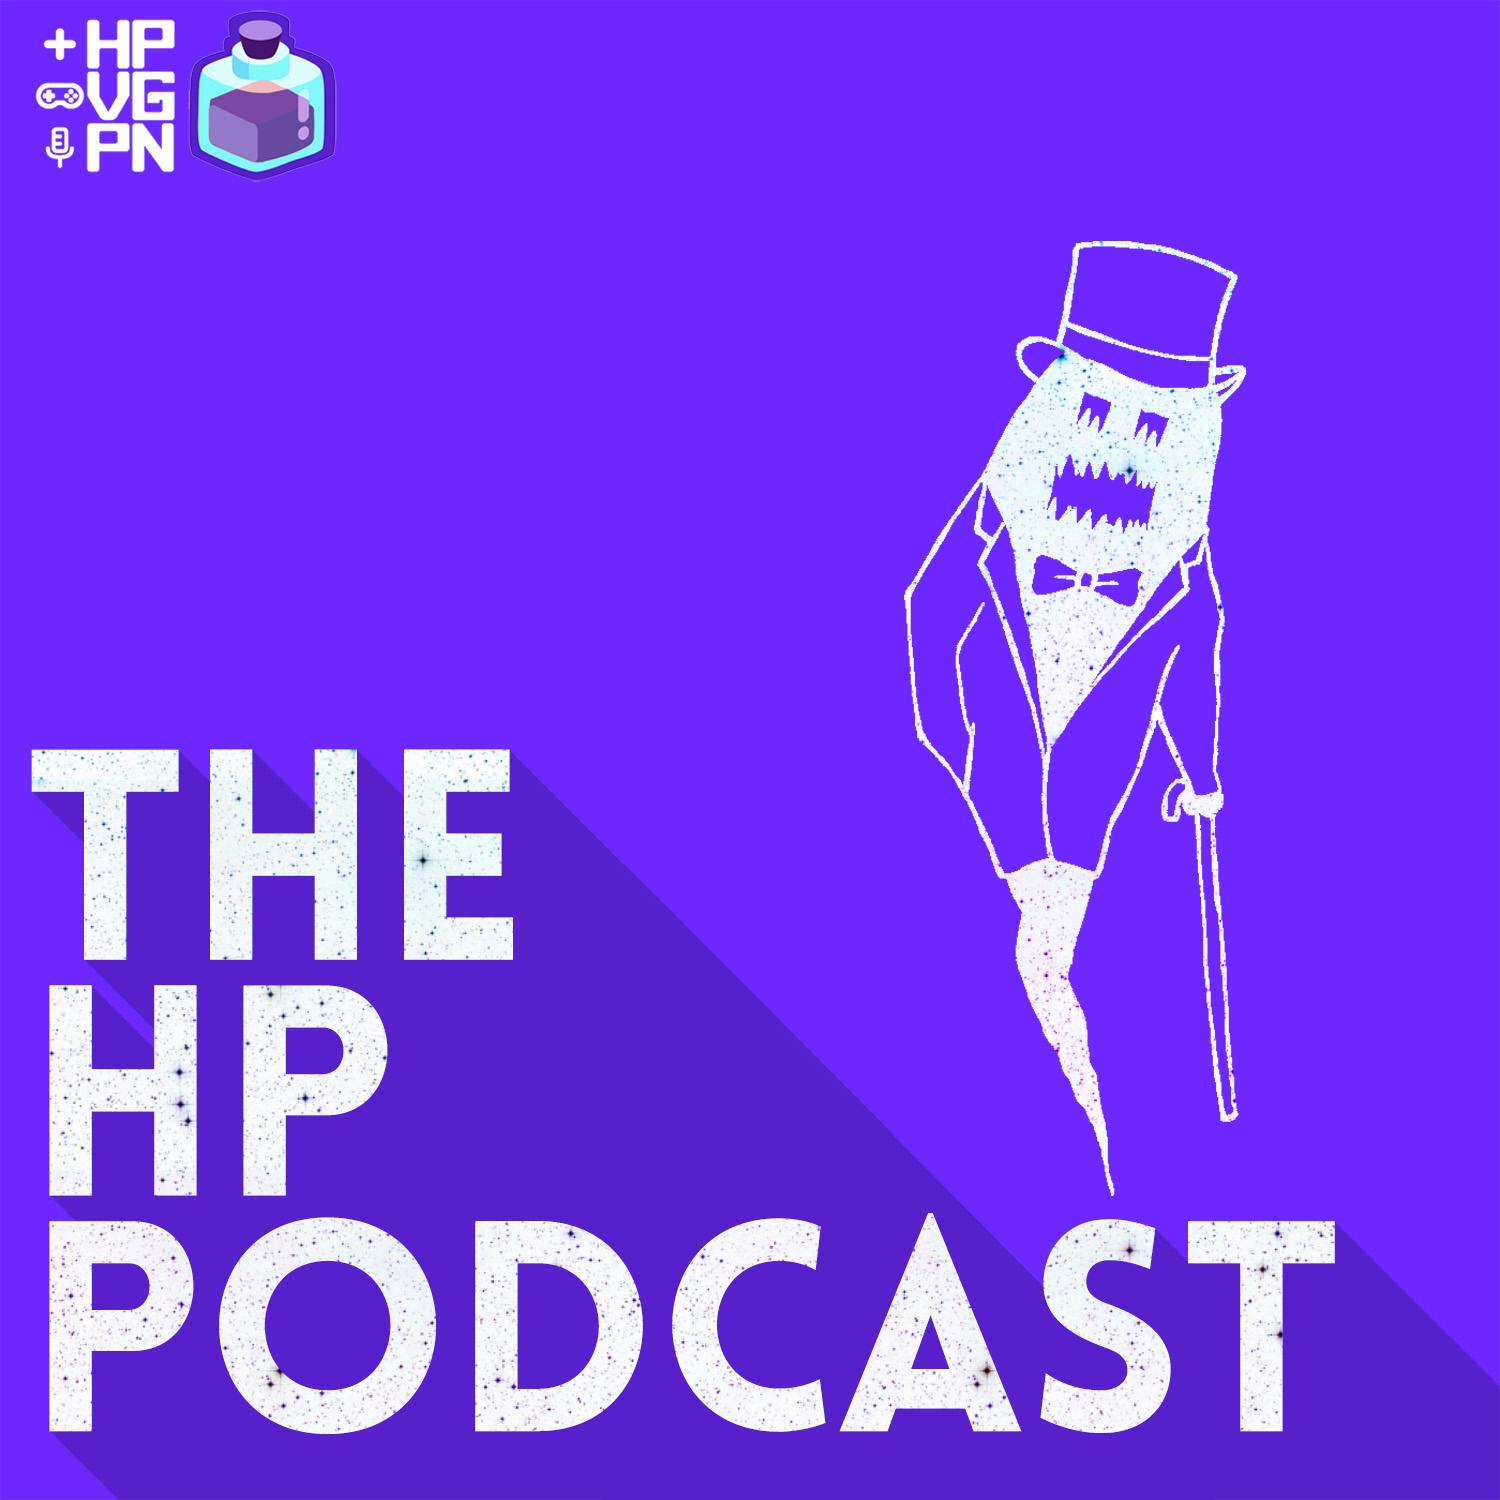 Xbox’s Major Mistake - The HP Podcast Episode 106